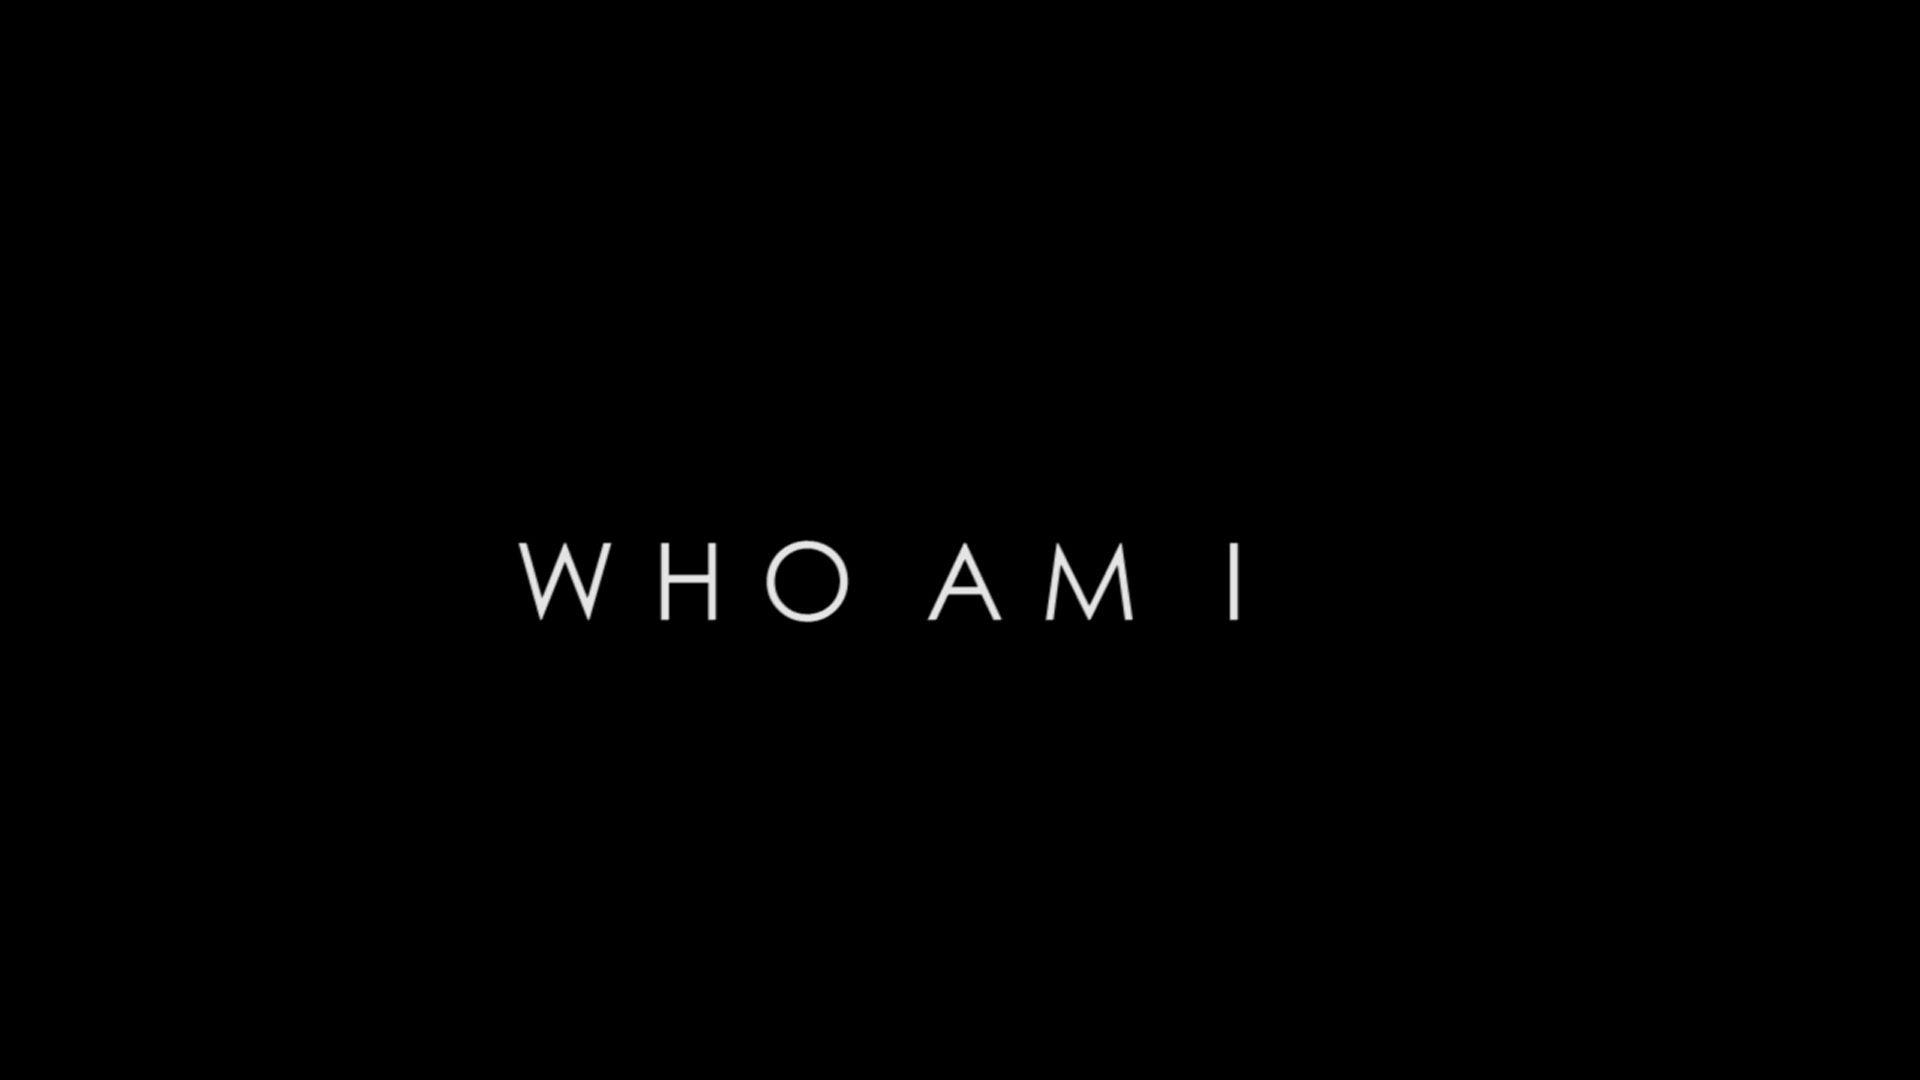 Who Am I wallpaper, Movie, HQ Who Am I pictureK Wallpaper